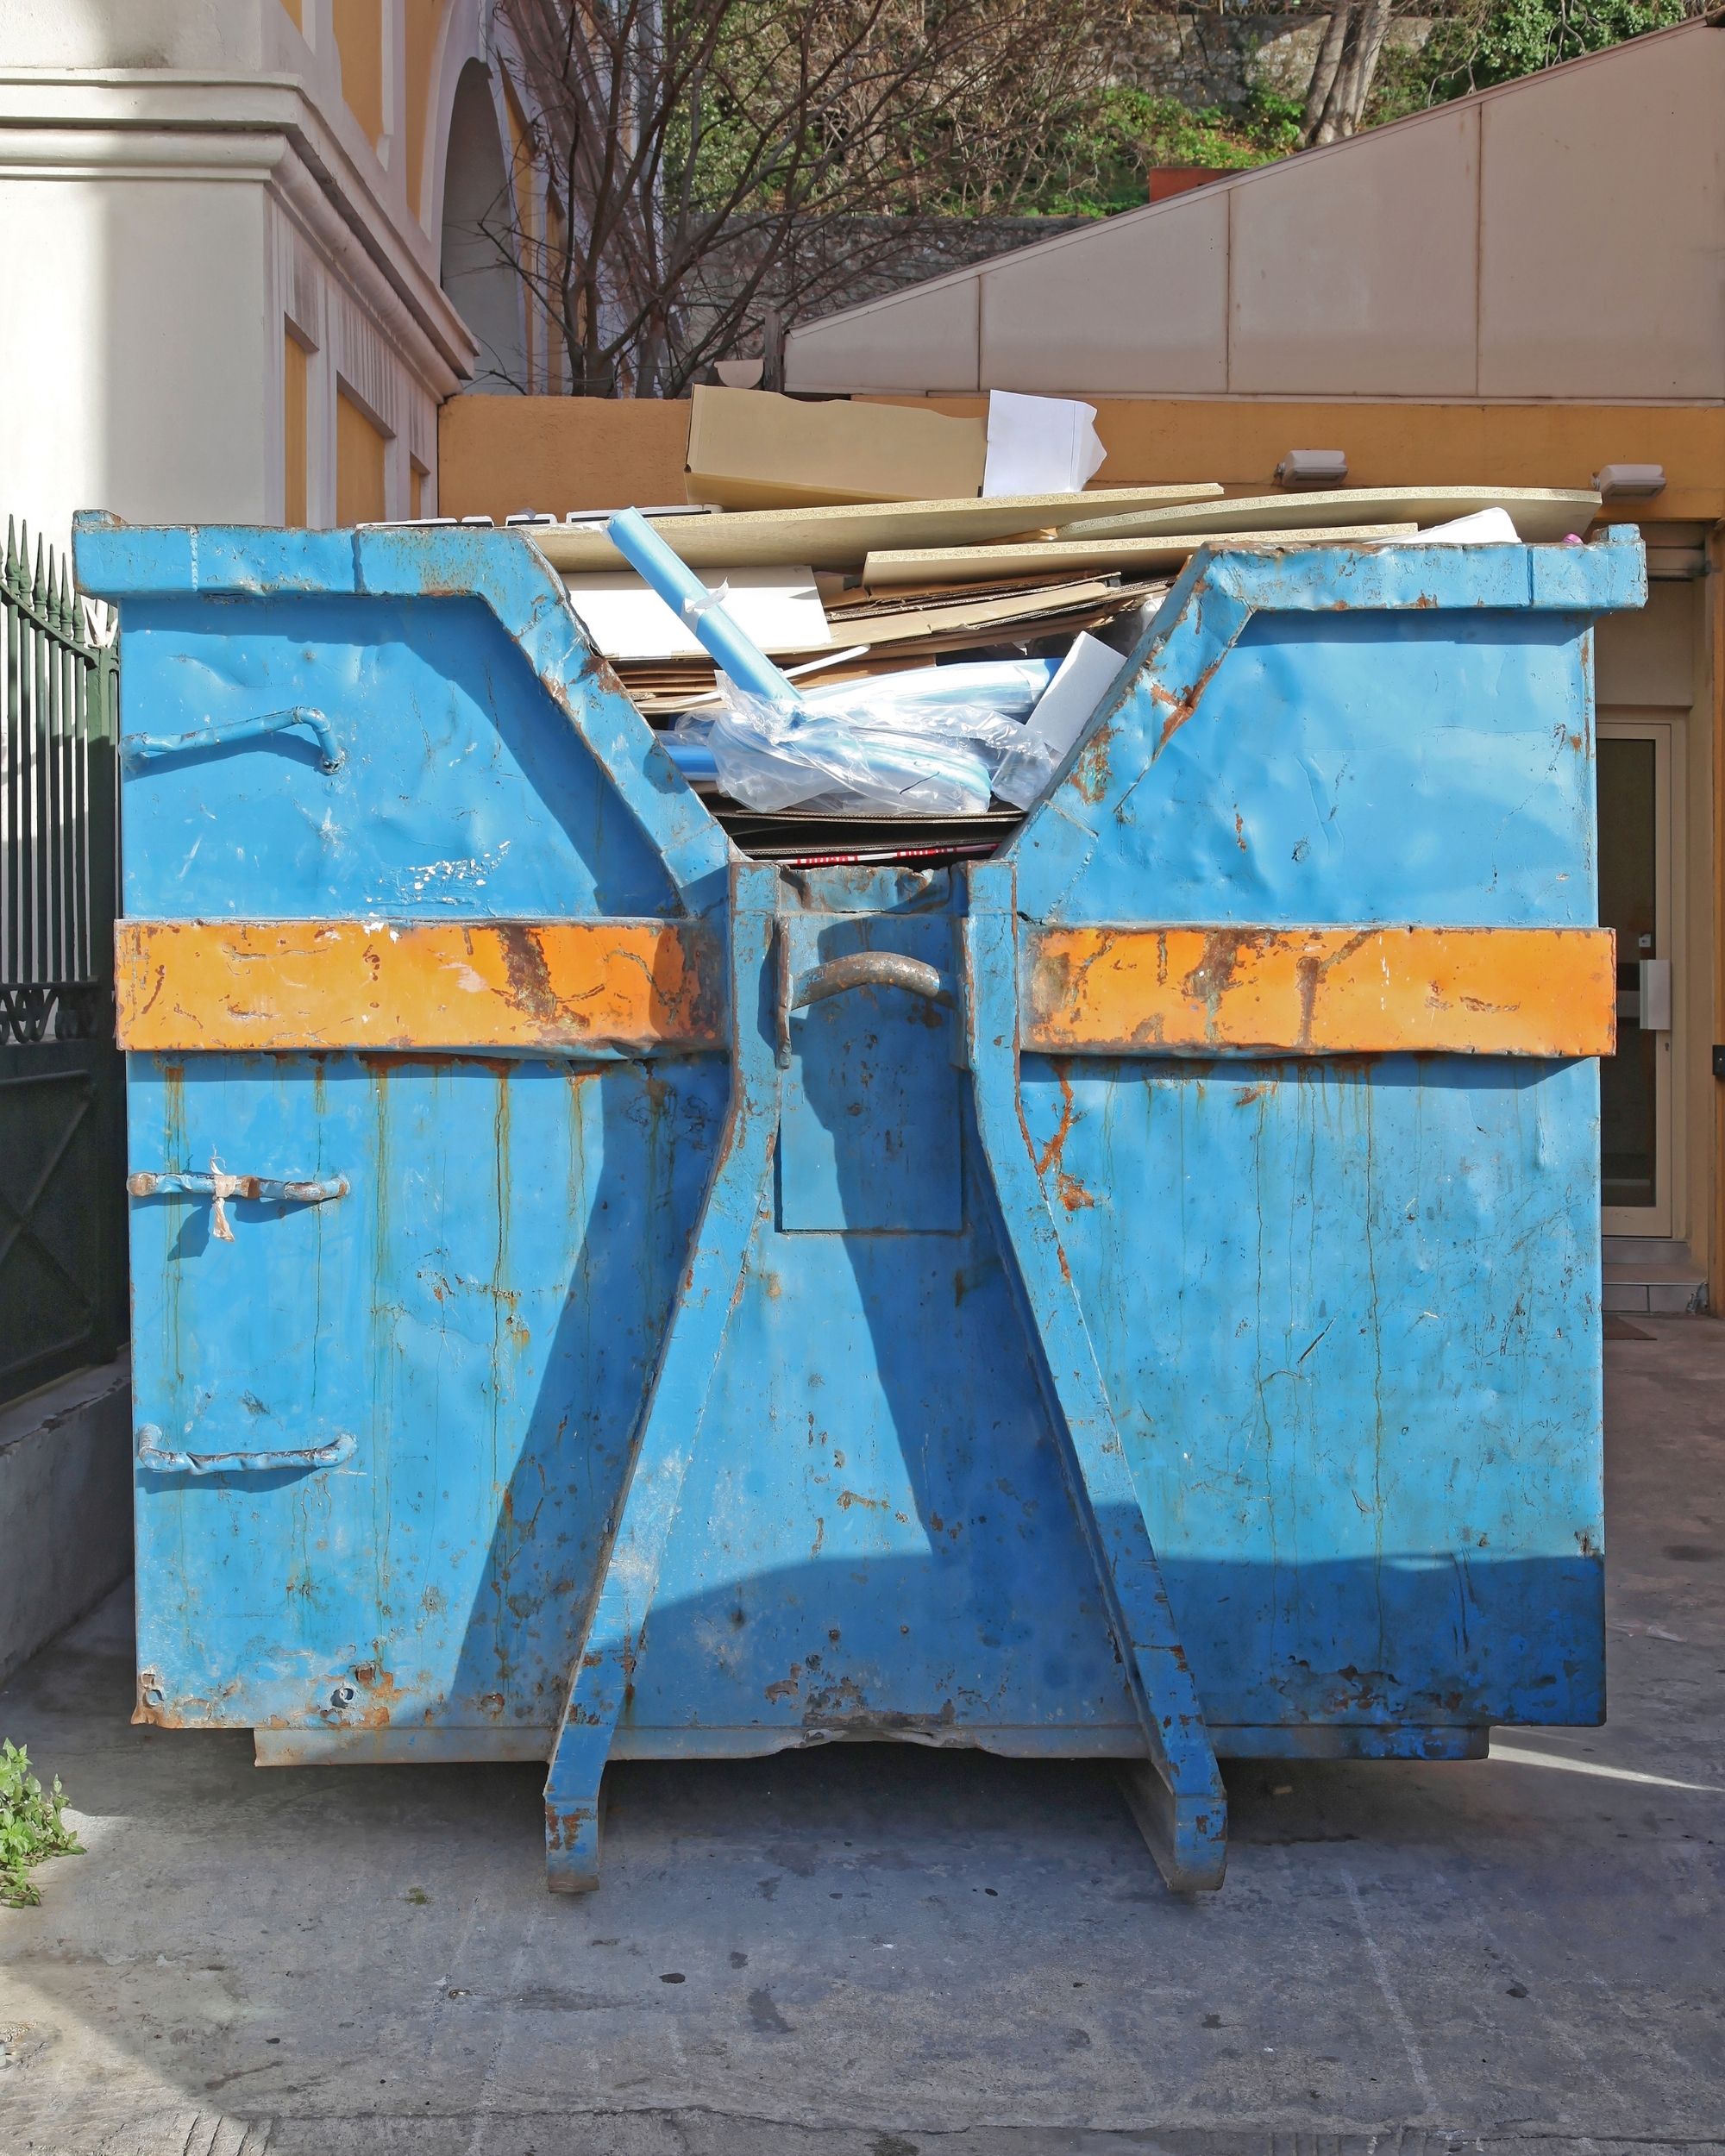 Searching The Different Kinds Of Skip Bins Adelaide - Rita Reviews